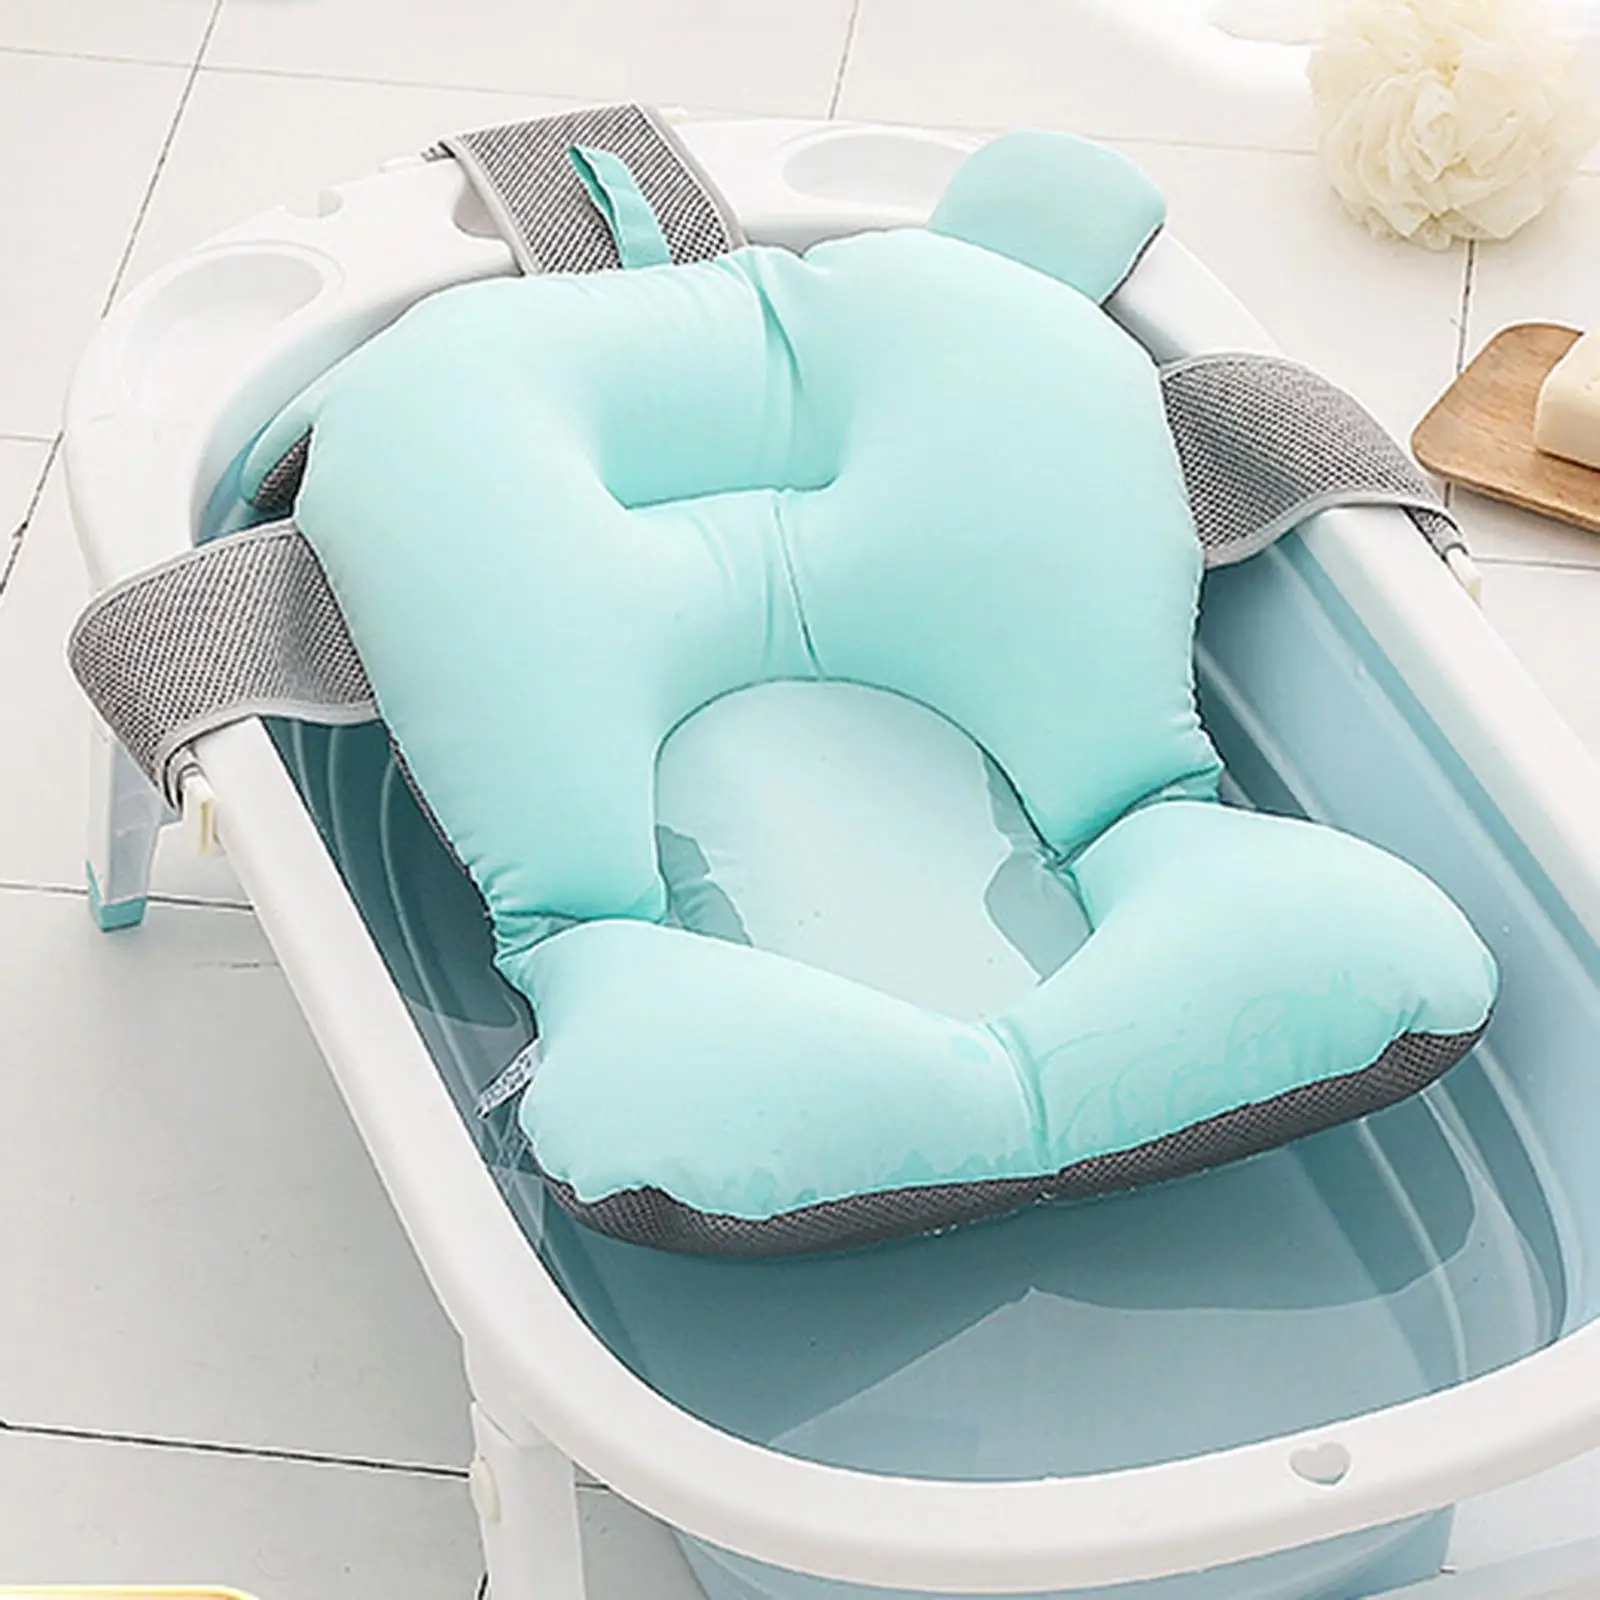 Infant Bathtub Support Cushion Net 20x14.2x3.5inch Dries Quickly Stable Breathable Trilateral Design Foldable Durable Soft Light